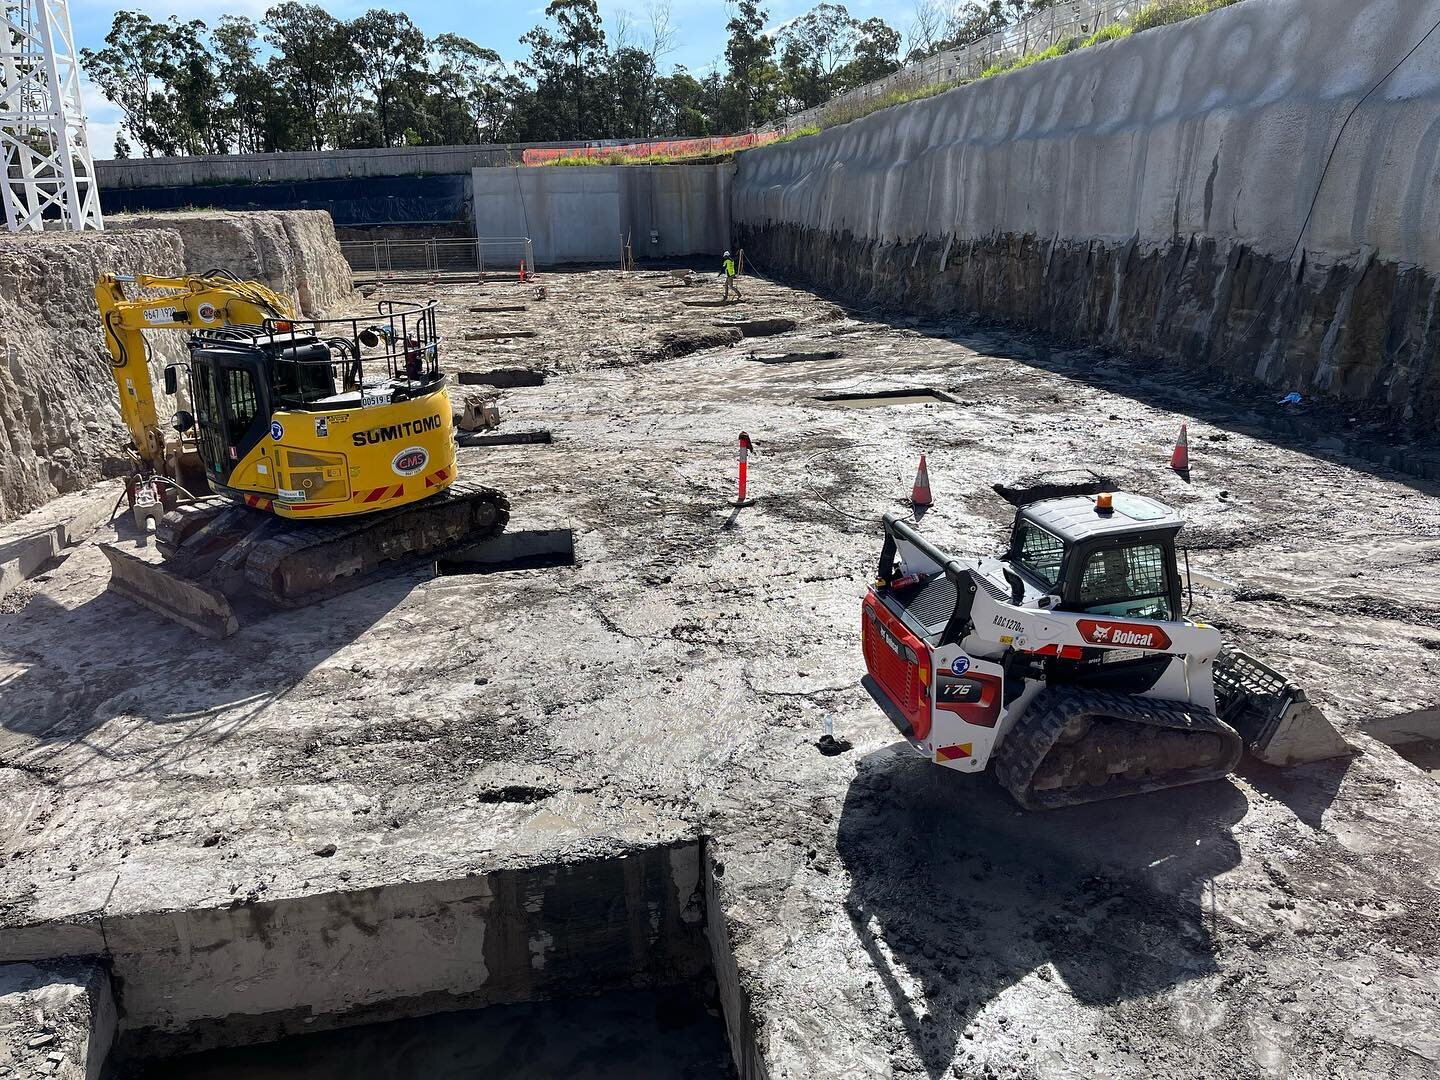 Teamwork makes the dream work 💪
Our T76 Positrack, 14, 8 and 6 tonne excavators all collaborating to carry out detailed excavation works at the North Kellyville project. Our team moves onto the final zone next week. 

For all your demolition, excava